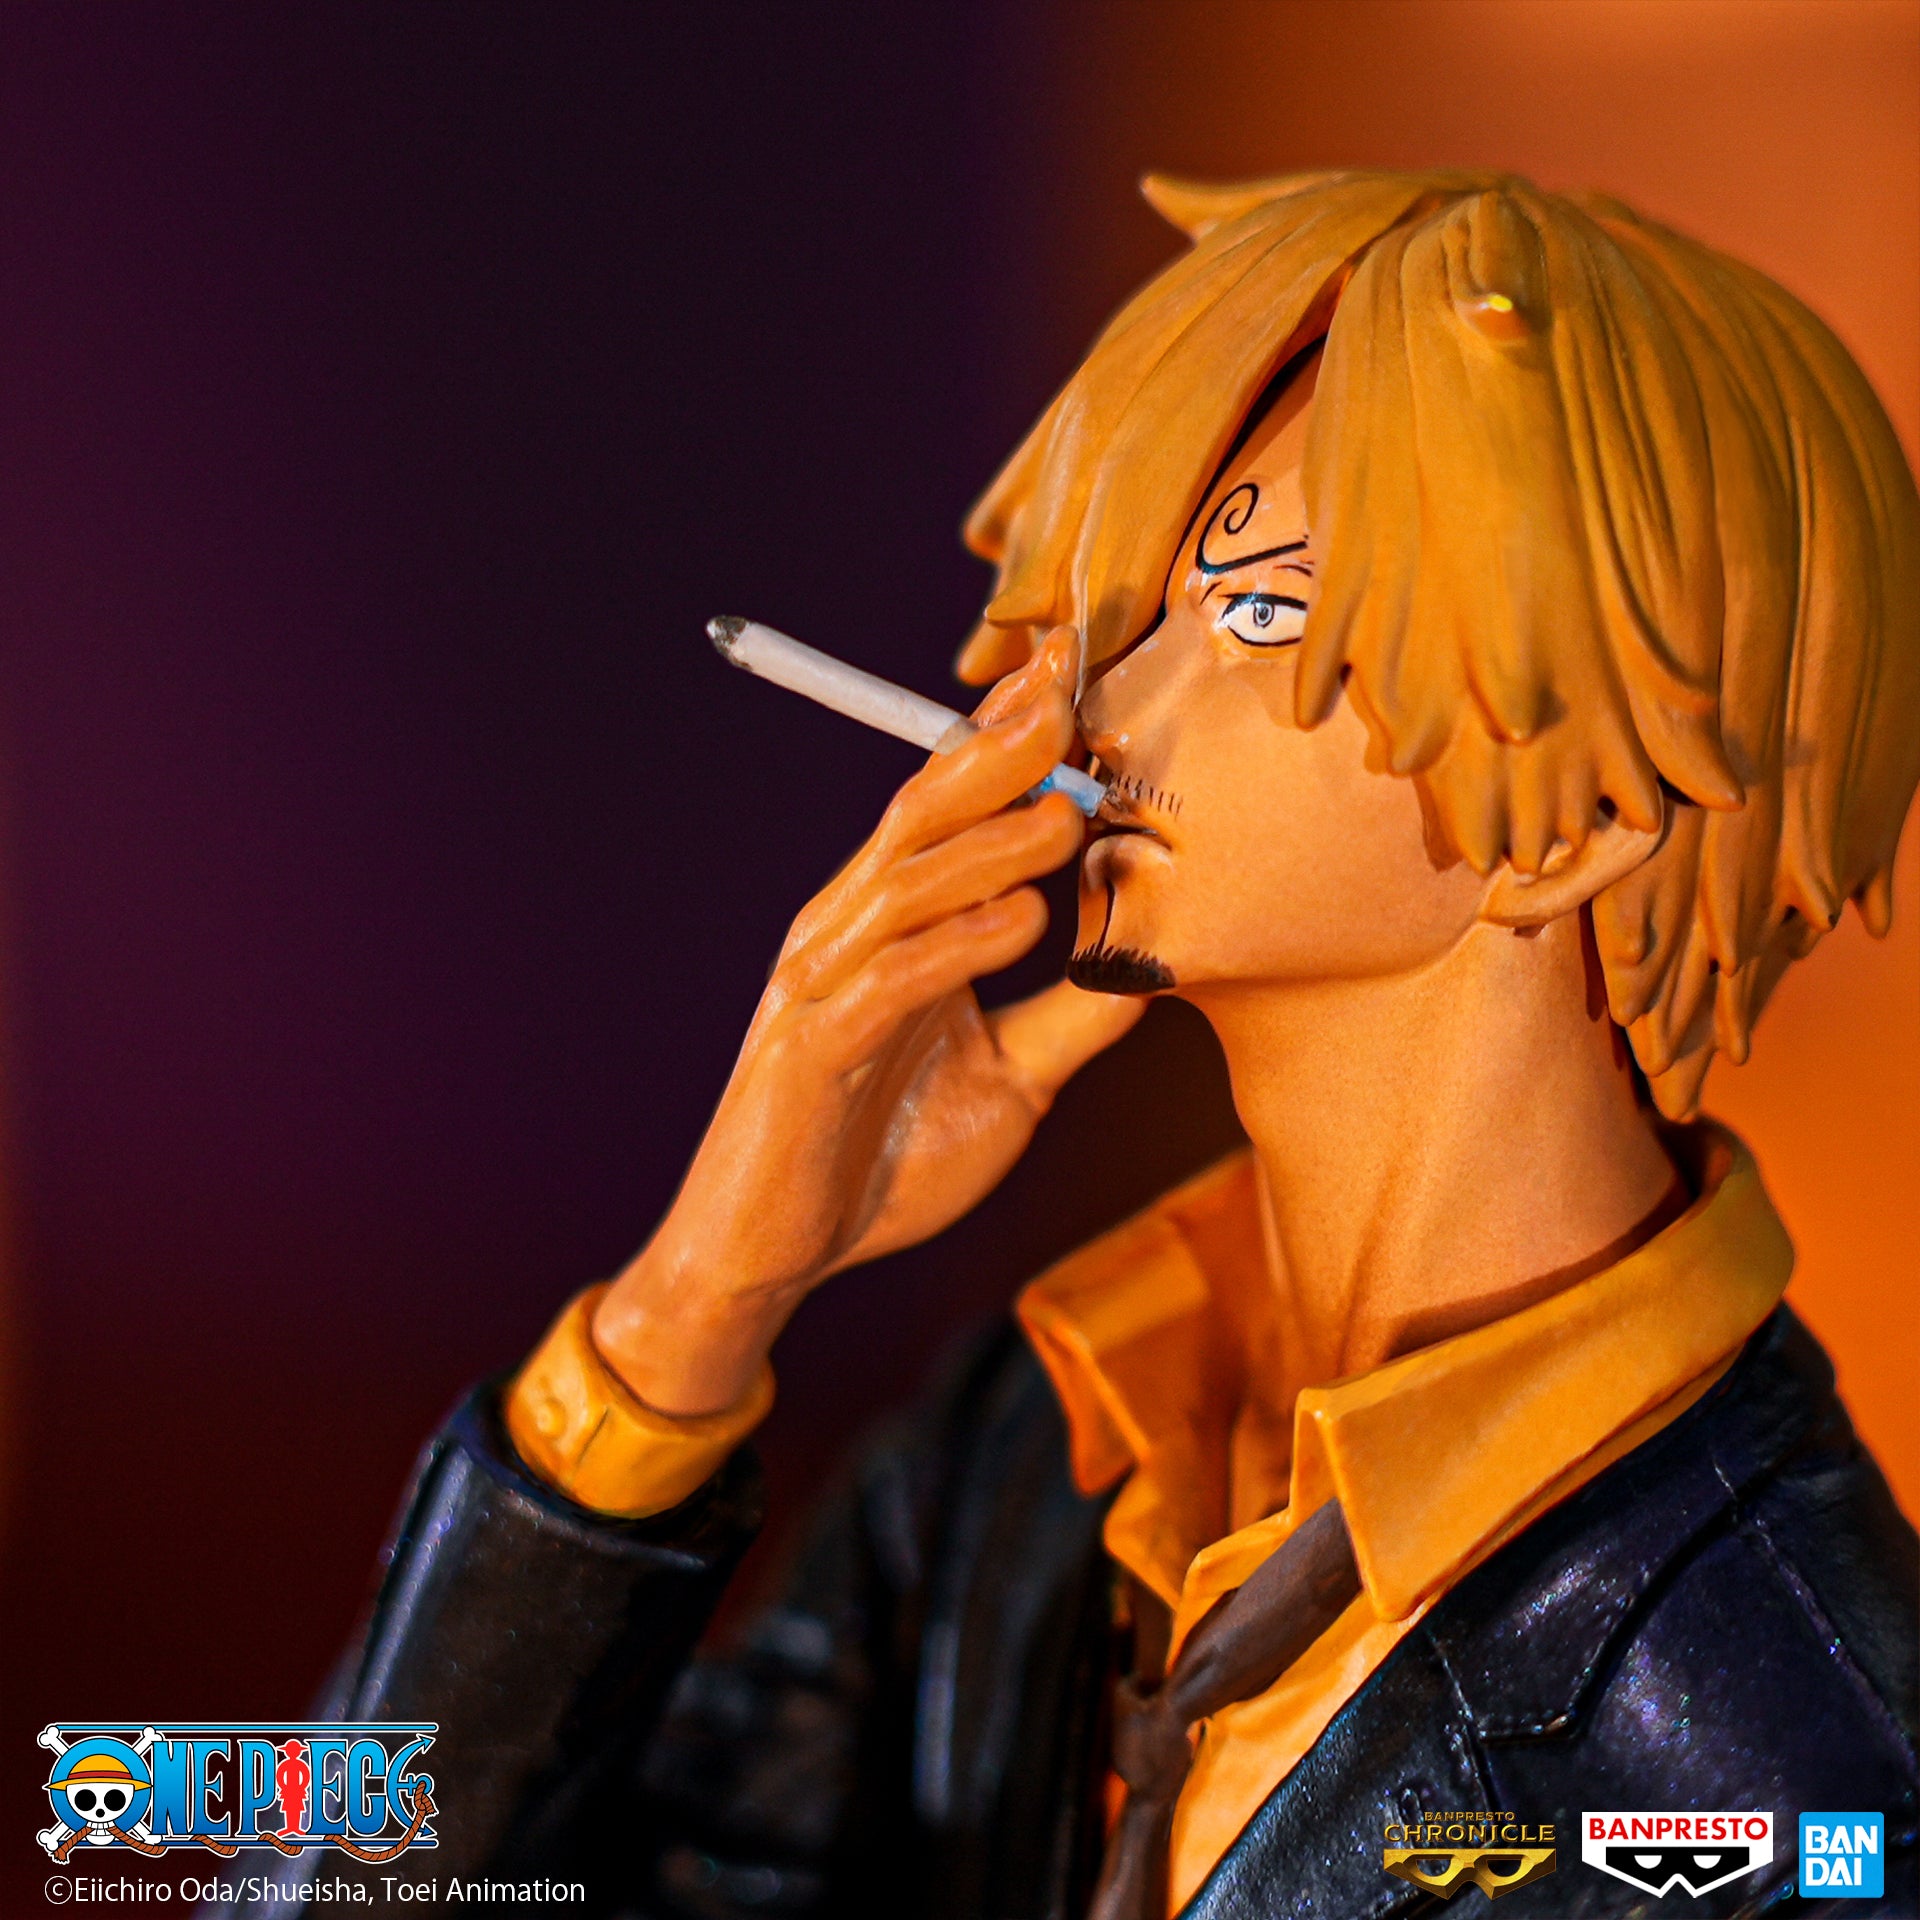 ONE PIECE CHRONICLE KING OF ARTIST SANJI FIG - Cape Collectibles